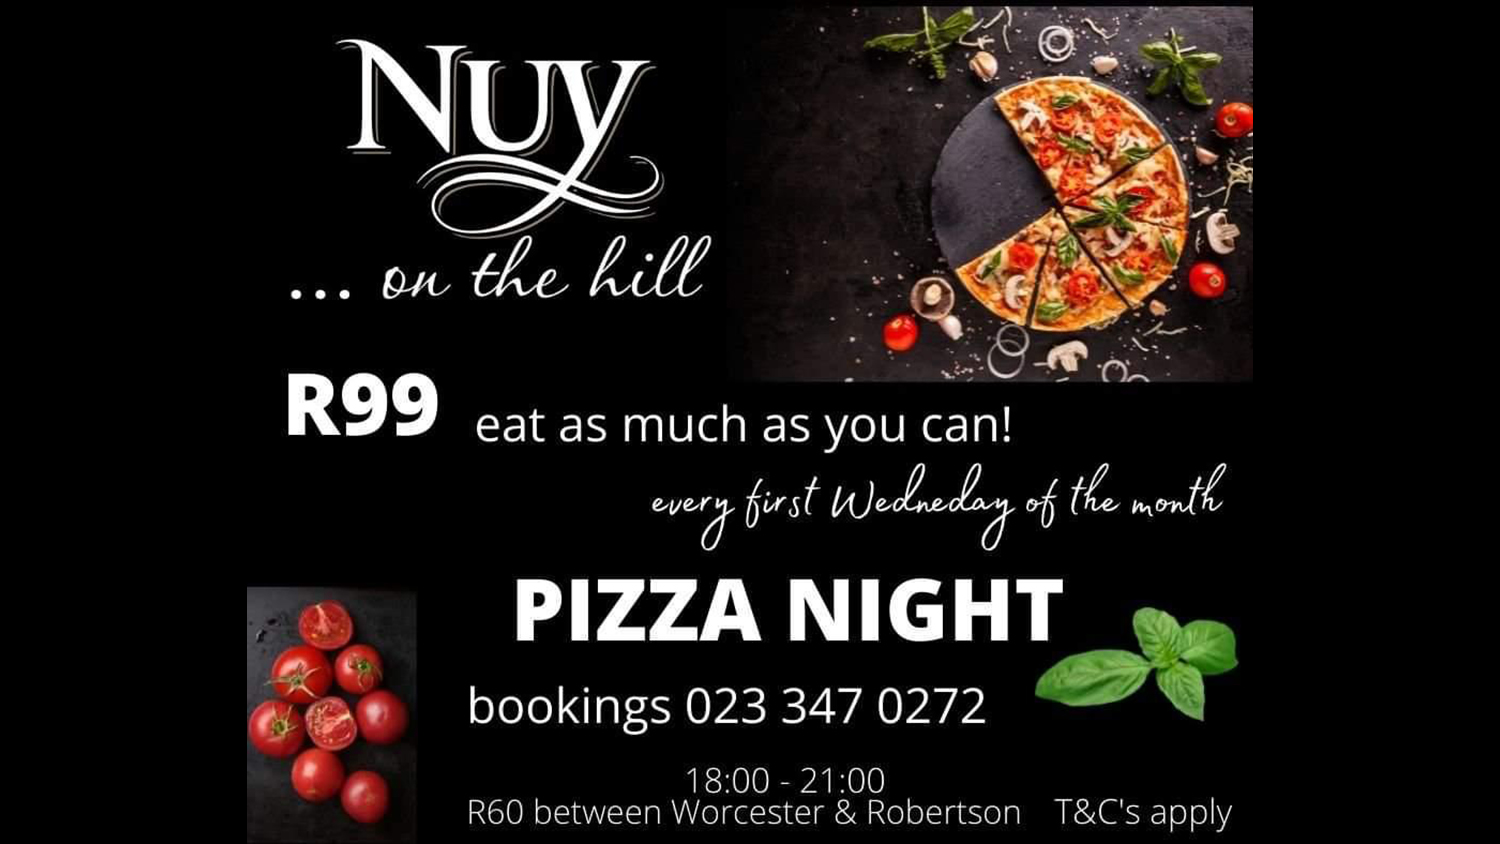 nuy pizza